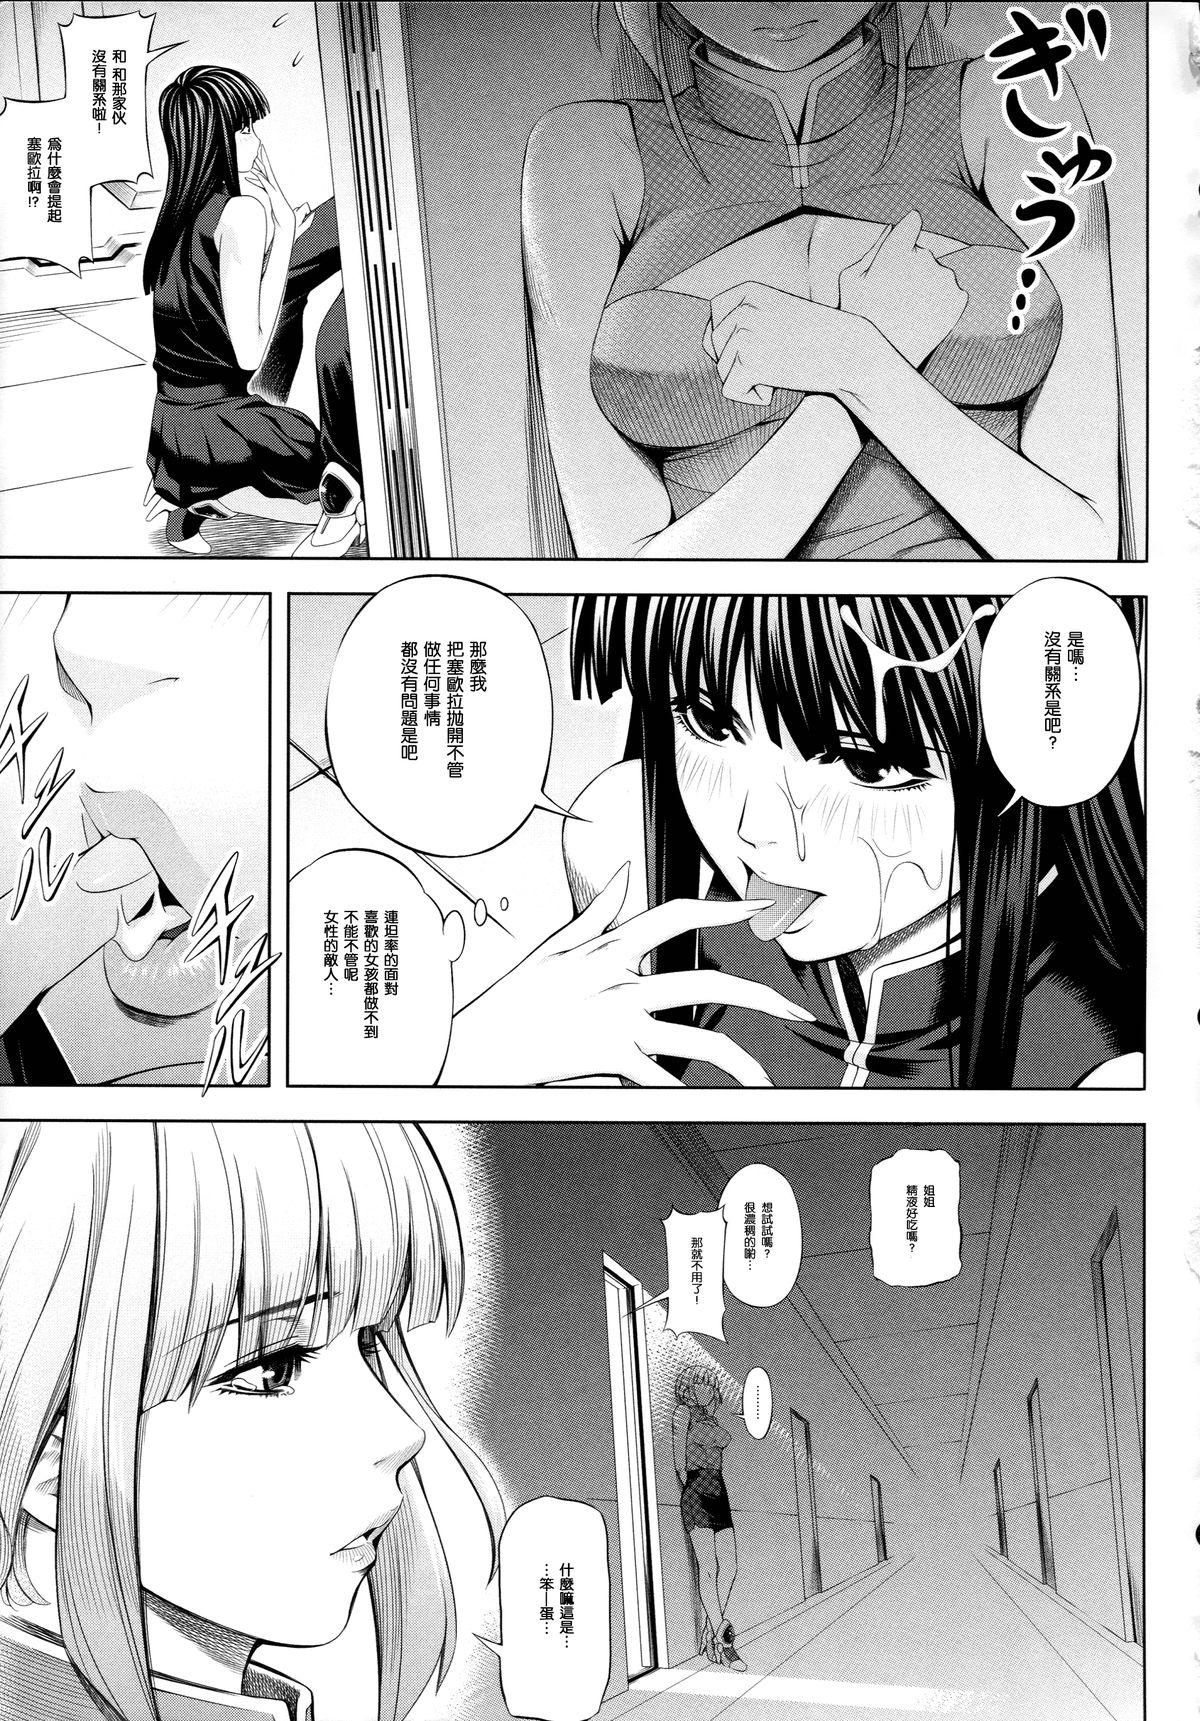 Titten ouka of book - Super robot wars Gay Pawn - Page 13